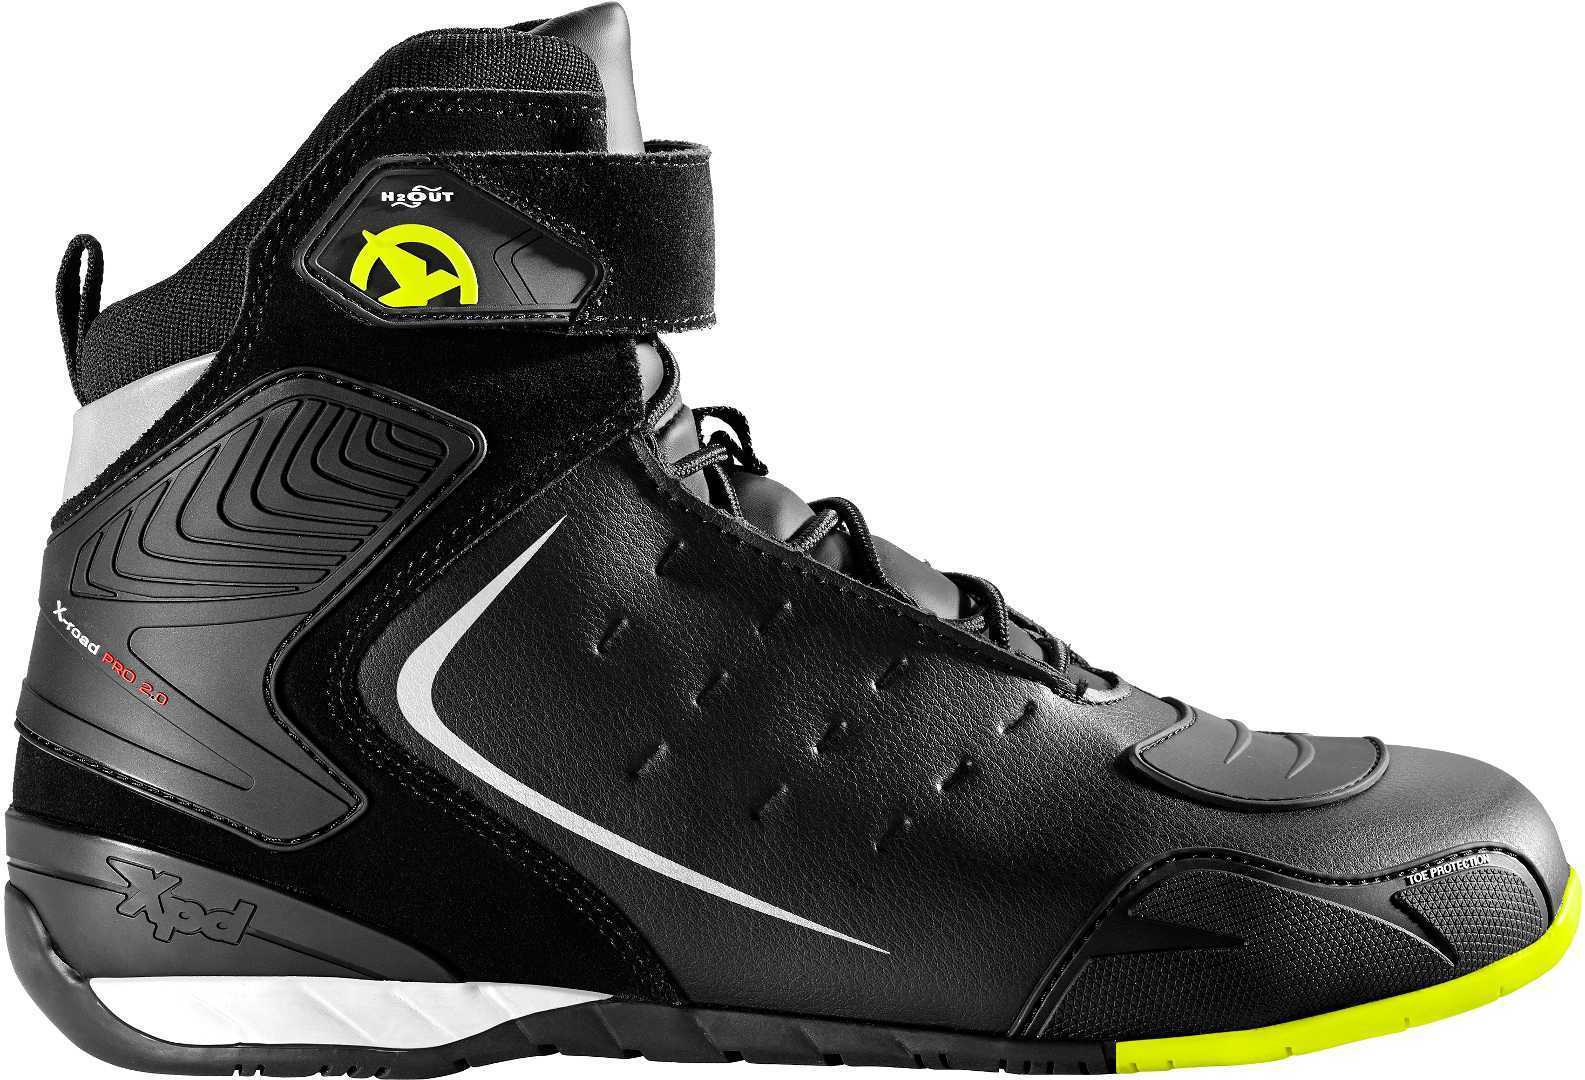 Image of XPD X-Road H2Out Yellow Fluo Size 42 ID 8030161345148